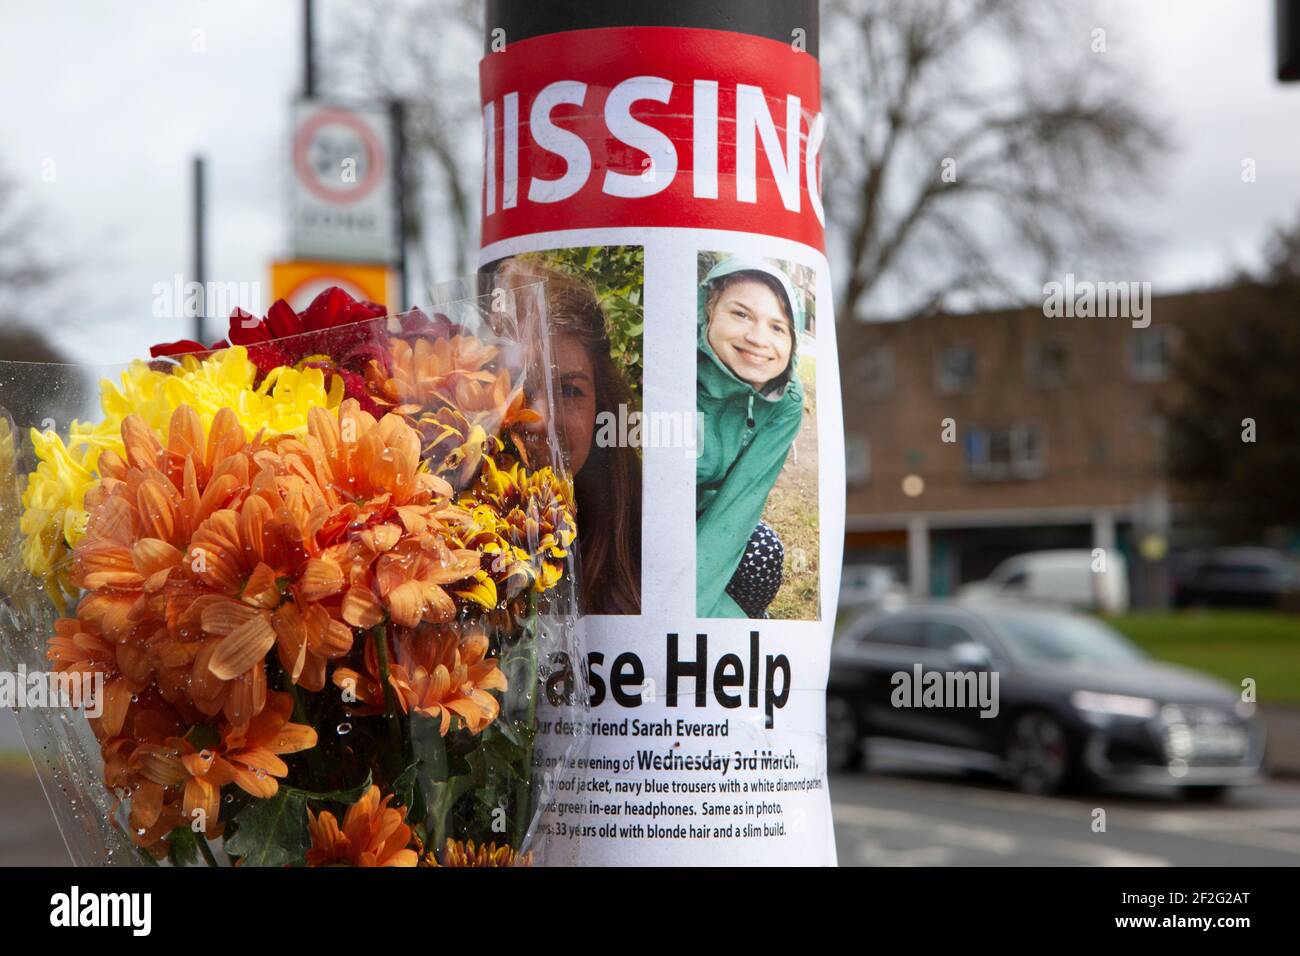 London, UK, 12 March 2021: Flowers and letters have been left in tribute to the murdered woman Sarah Everard on Poynders Road close to where she was last seen. Anna Watson/Alamy Live News Stock Photo